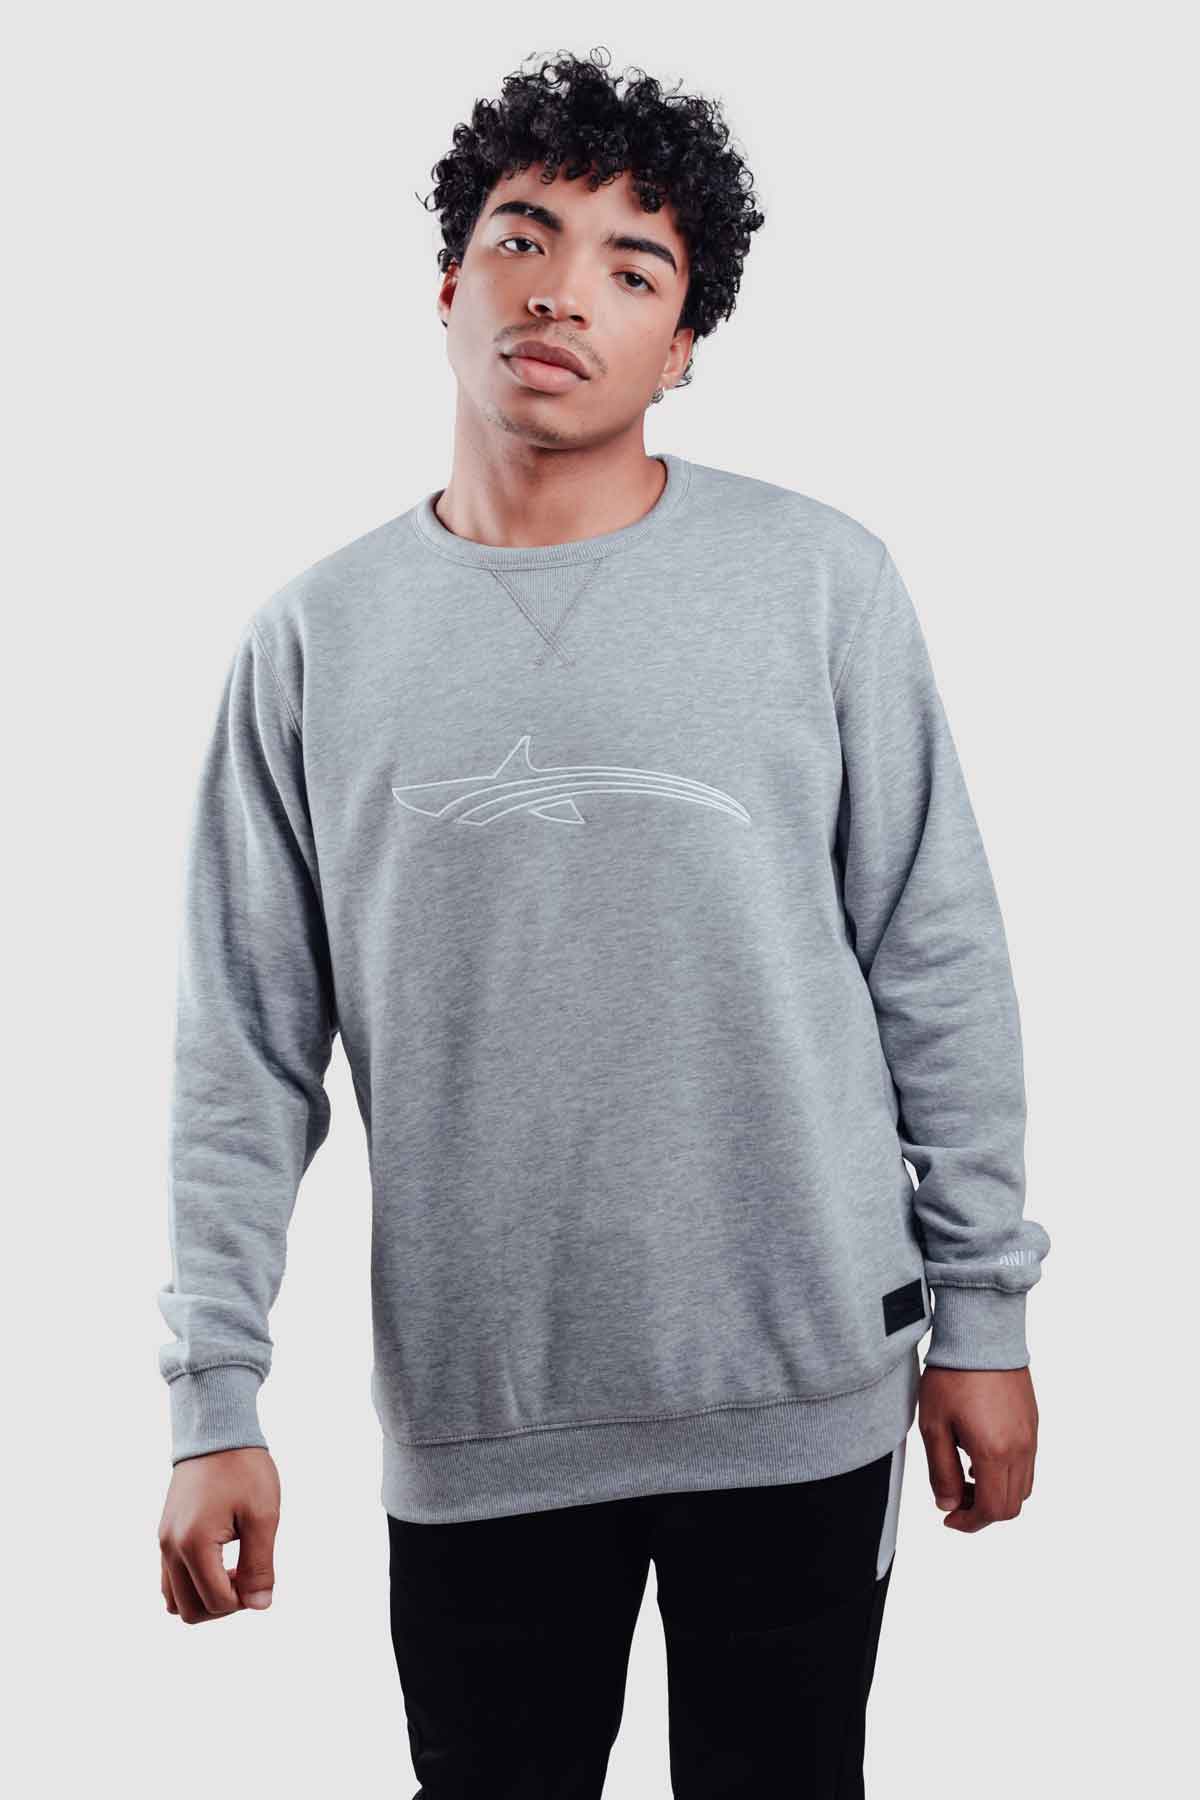 Model wearing a grey pull over sweater from oceanman - bali edition